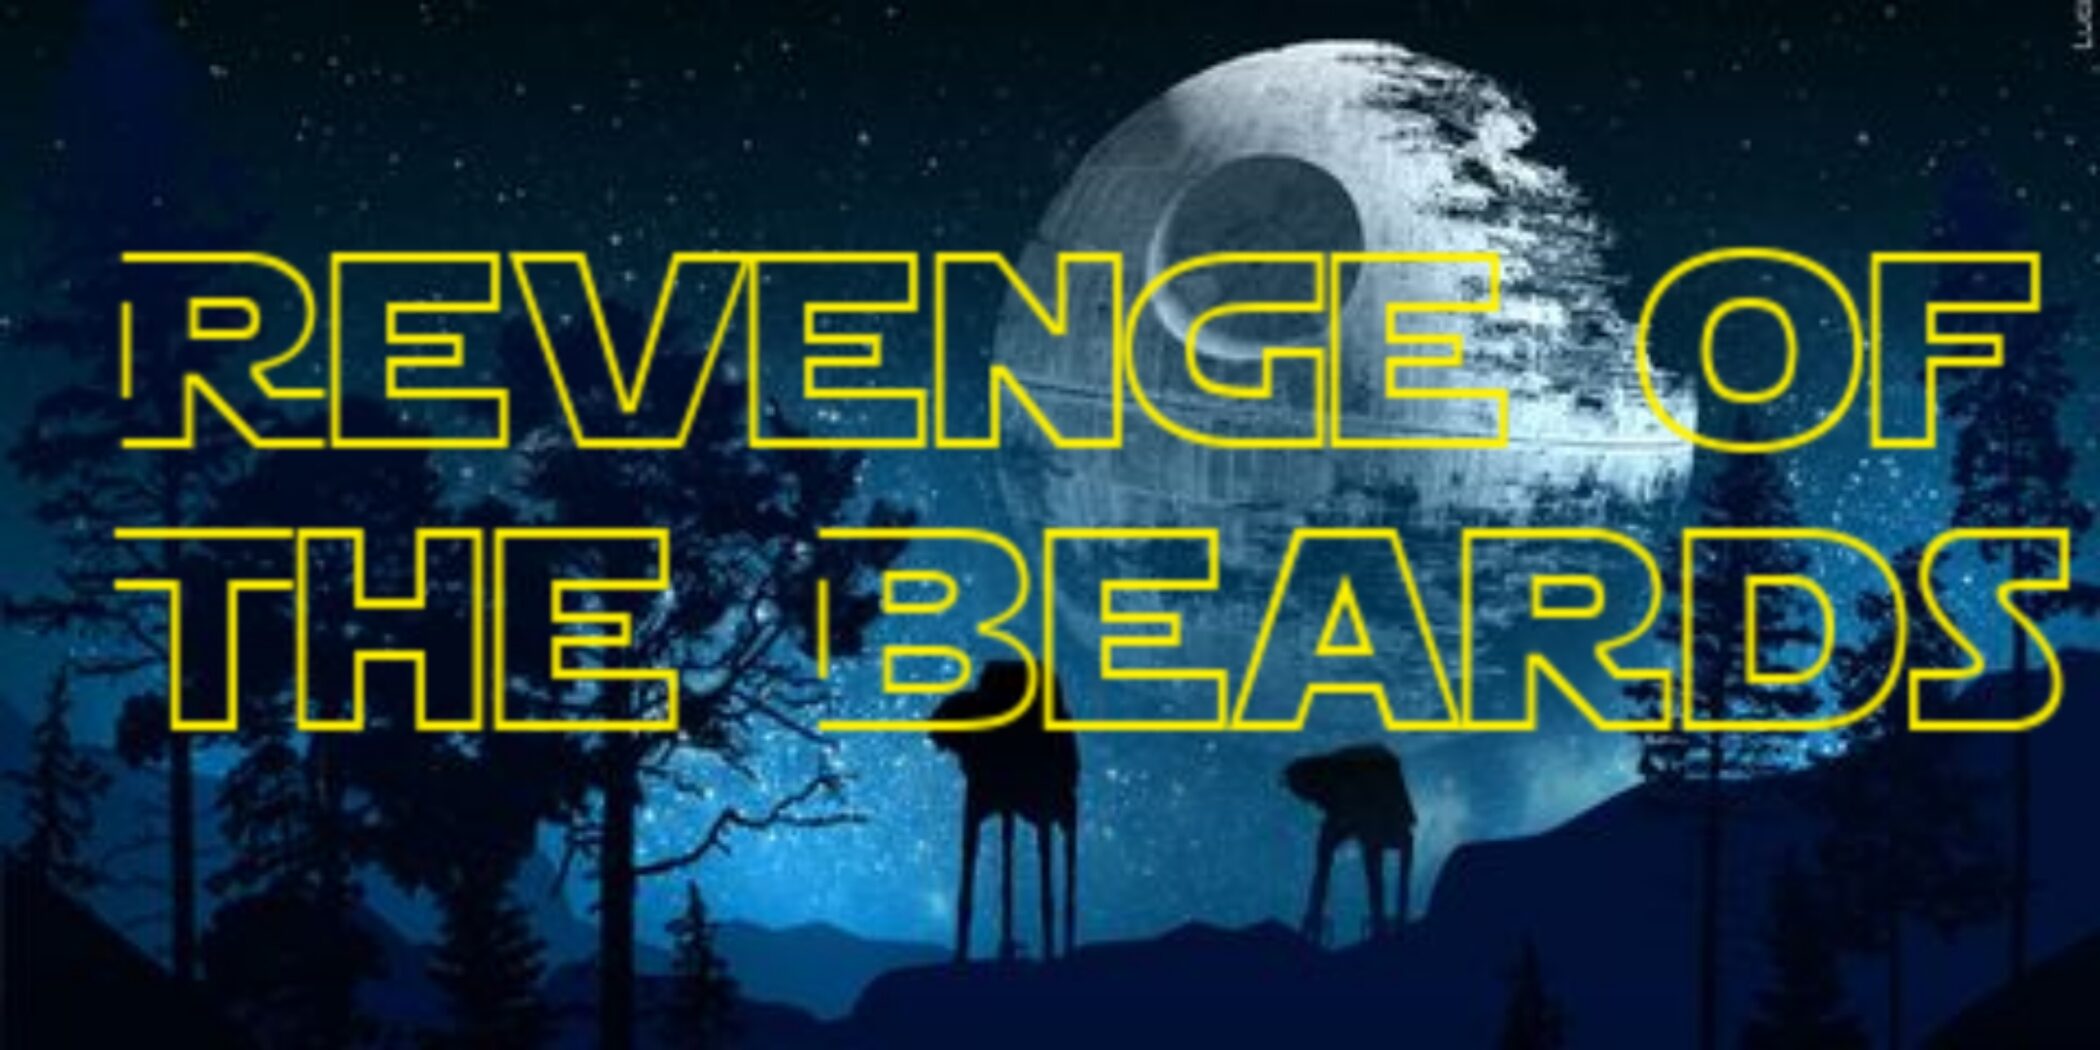 Revenge of the Beards 2024 flyer with a Star Wars background.